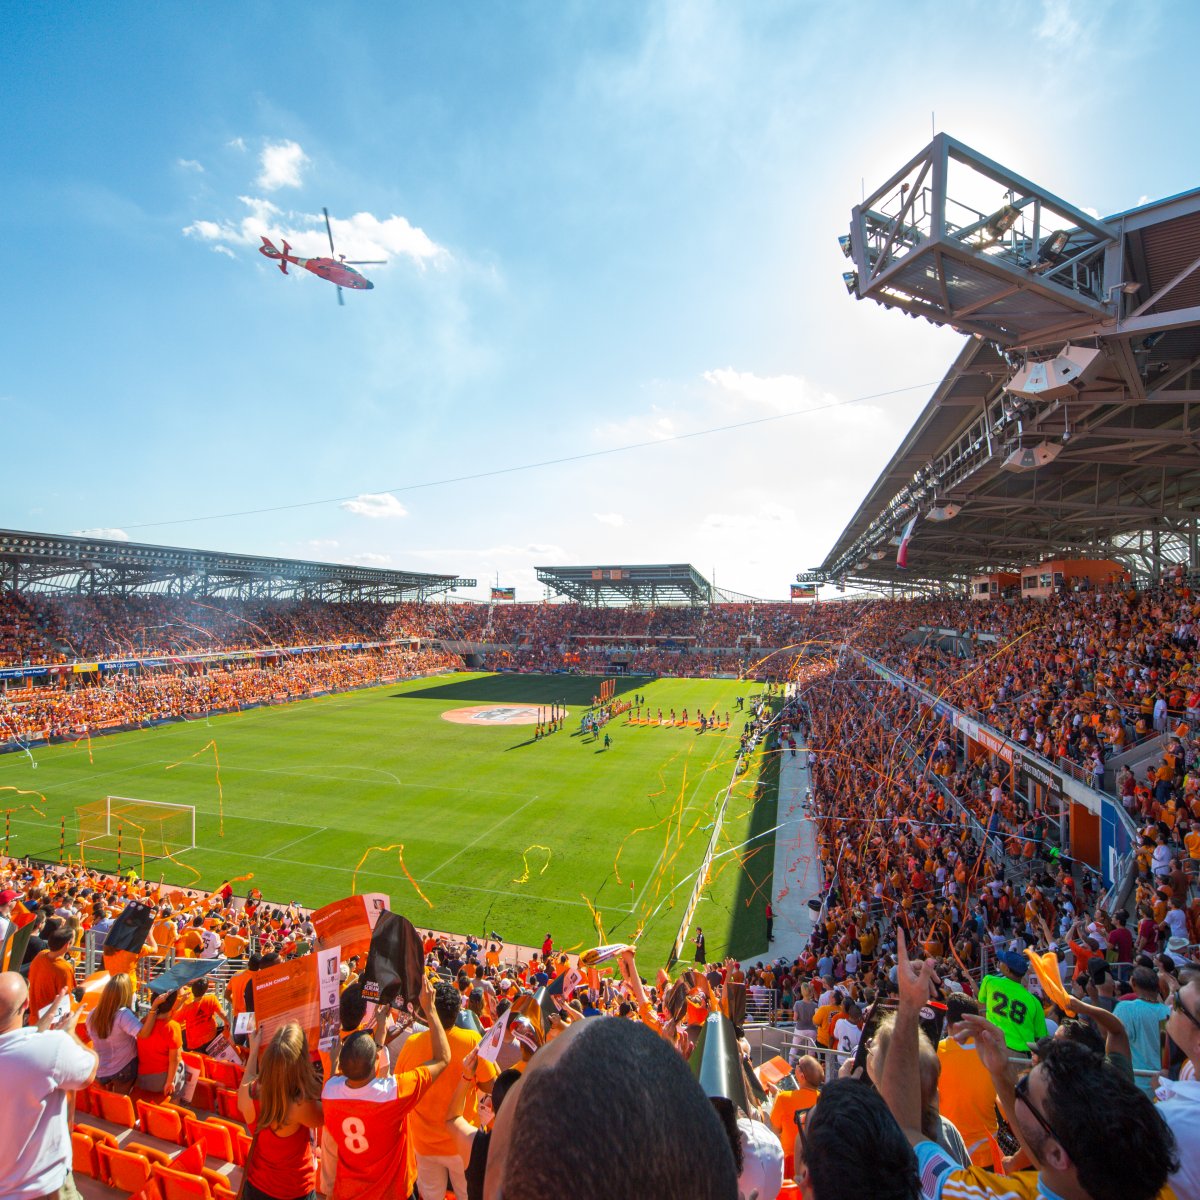 Interior image of BBVA Compass Stadium during a soccer game with the crowd cheering